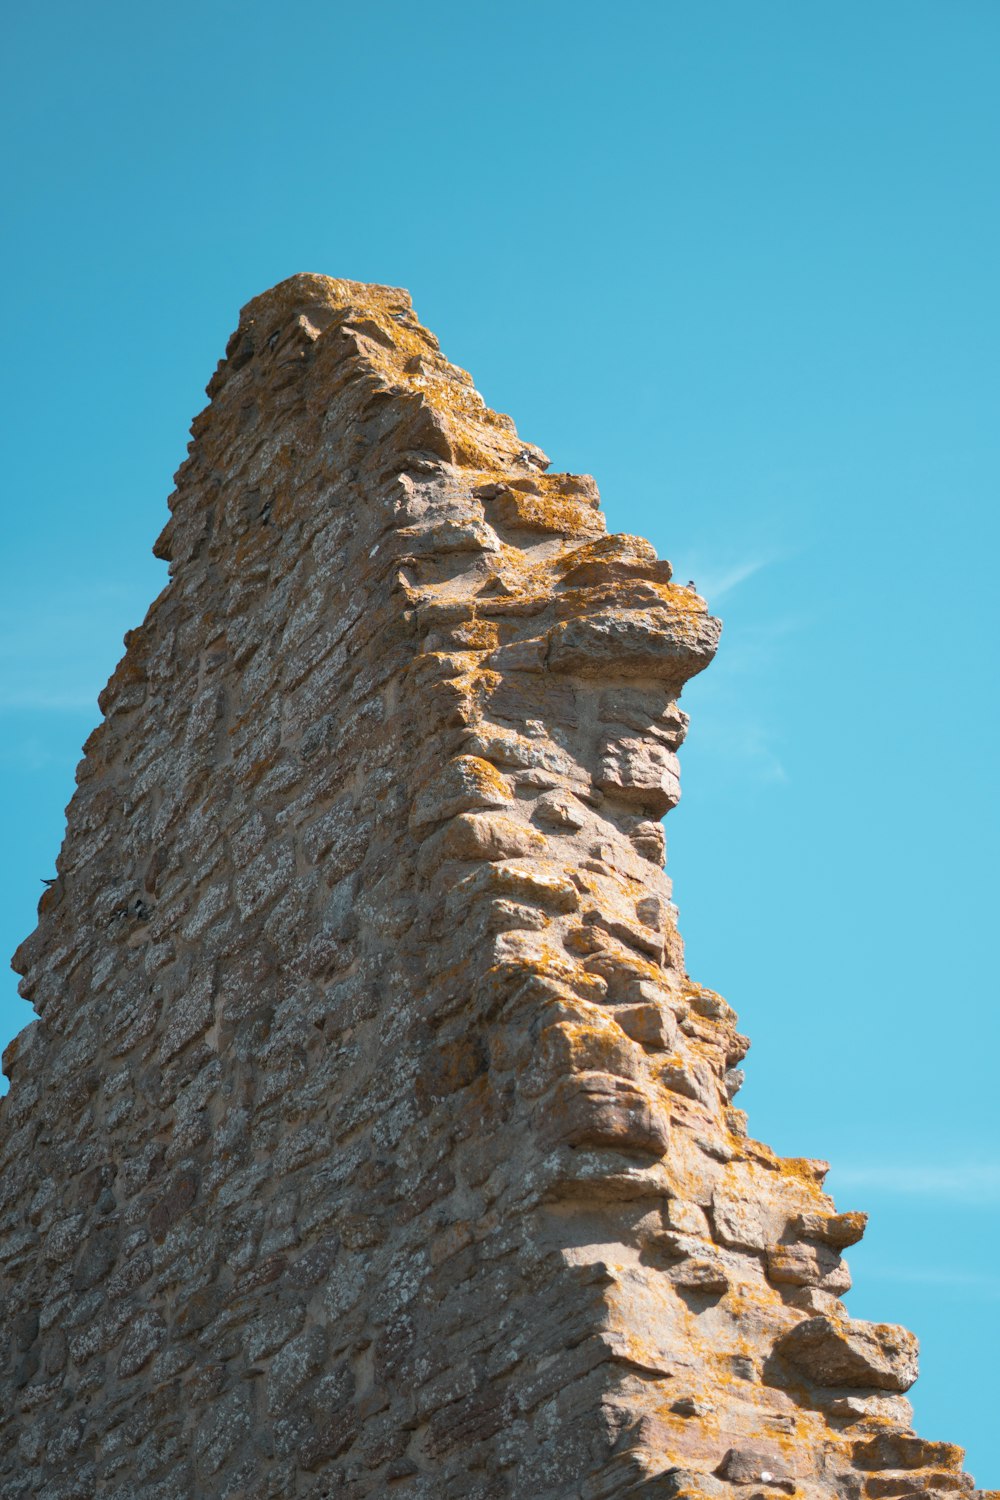 a stone tower with a bird perched on top of it